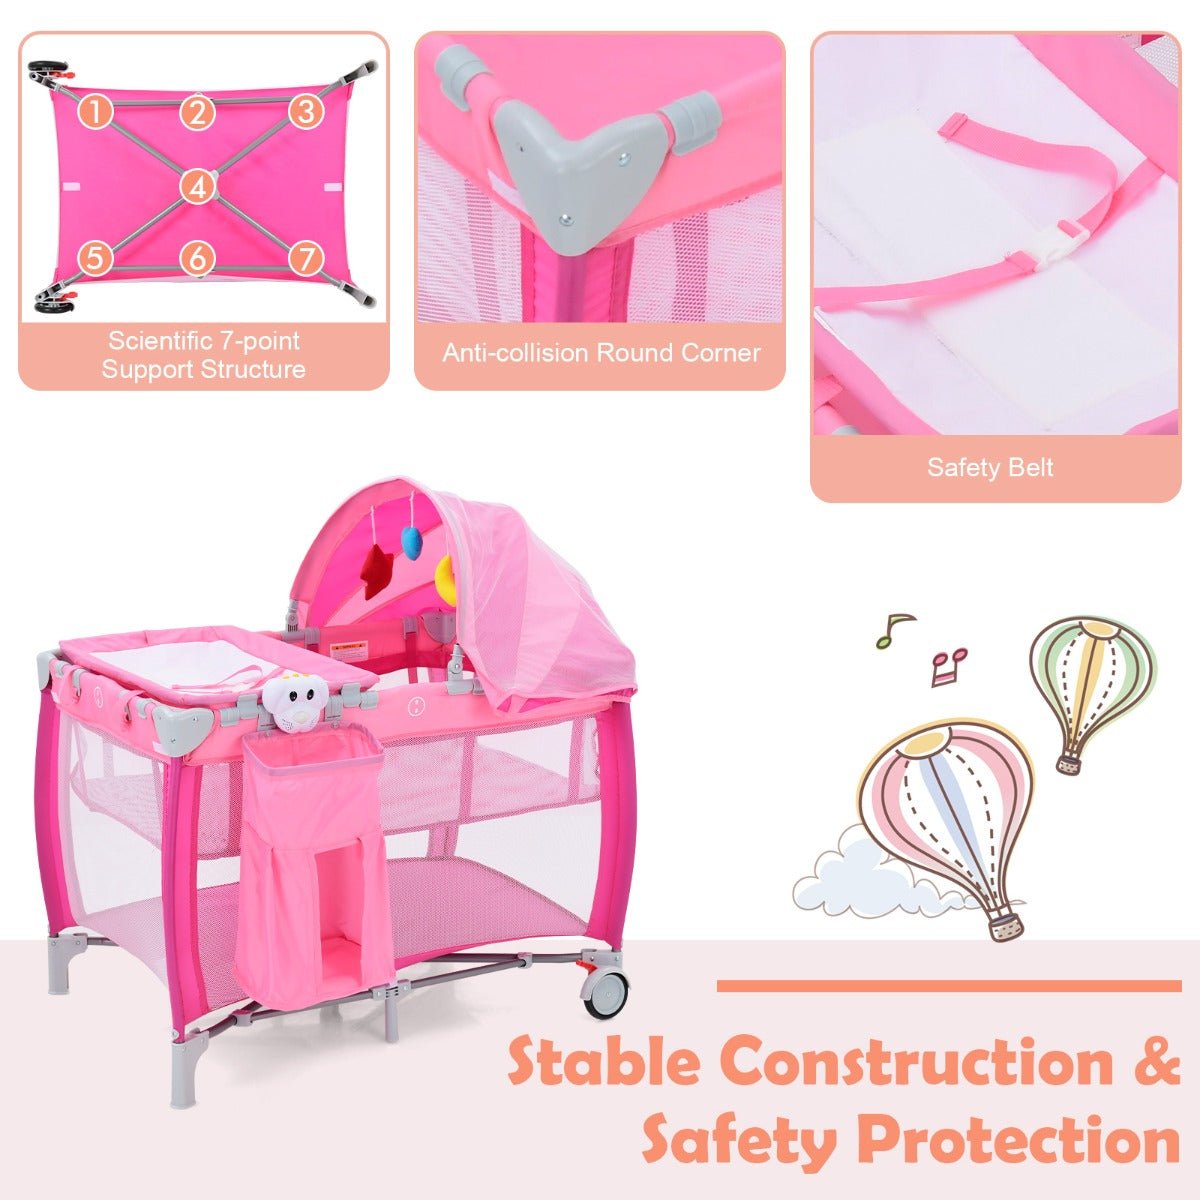 Convertible Baby Portacot - 3-in-1 Design with Adjustable Net for Safety